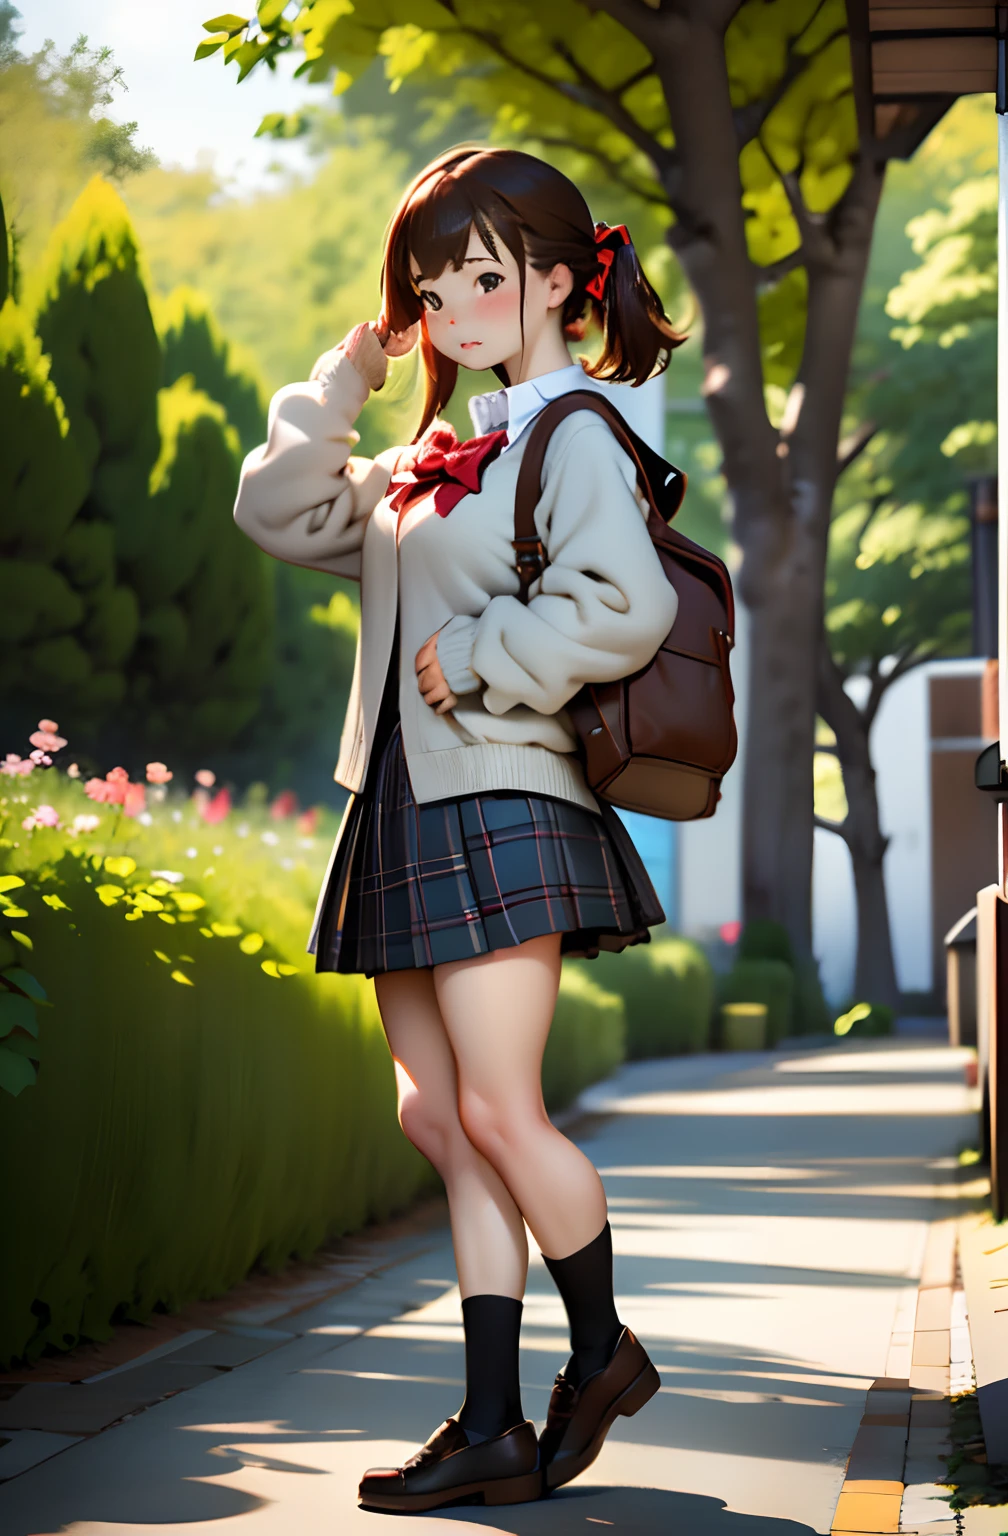 top-quality,masutepiece,Anime style,parfect anatomy,solo,skirt by the, bags, plein air, jaket, Standing, socks, shoe, looking at the viewers, Brown Footwear, Uniforms, Plaid, lowfers, blazers, brown haired, plaid skirts, Black socks, long-sleeve, bangss, Open your clothes, Open jacket, the bow, Brown-eyed, pleatedskirt, a bow tie, day, length hair, full body Esbian, bush, Red bow, Knee height, The shirt, Mouth closed, sleeves past wrists, backsack, hand on own face, red bowtie, Black jacket, a school bag, red blush, a plant, Brown skirt, Put your hand on your cheek, bblurry, From Side, raise two hands, look at side, shirt with collar, a miniskirt, white  shirt, cardigan, Grassy, Sweaters, Light smile,longshot, (low angles), (top down), Realistic scale,Significant shrinkage:1.5、photos realistic、Super Detail, Realistic, Super realistic, lifelike rendering,plein air,Cherry blossom blooming street,Professional Photographer